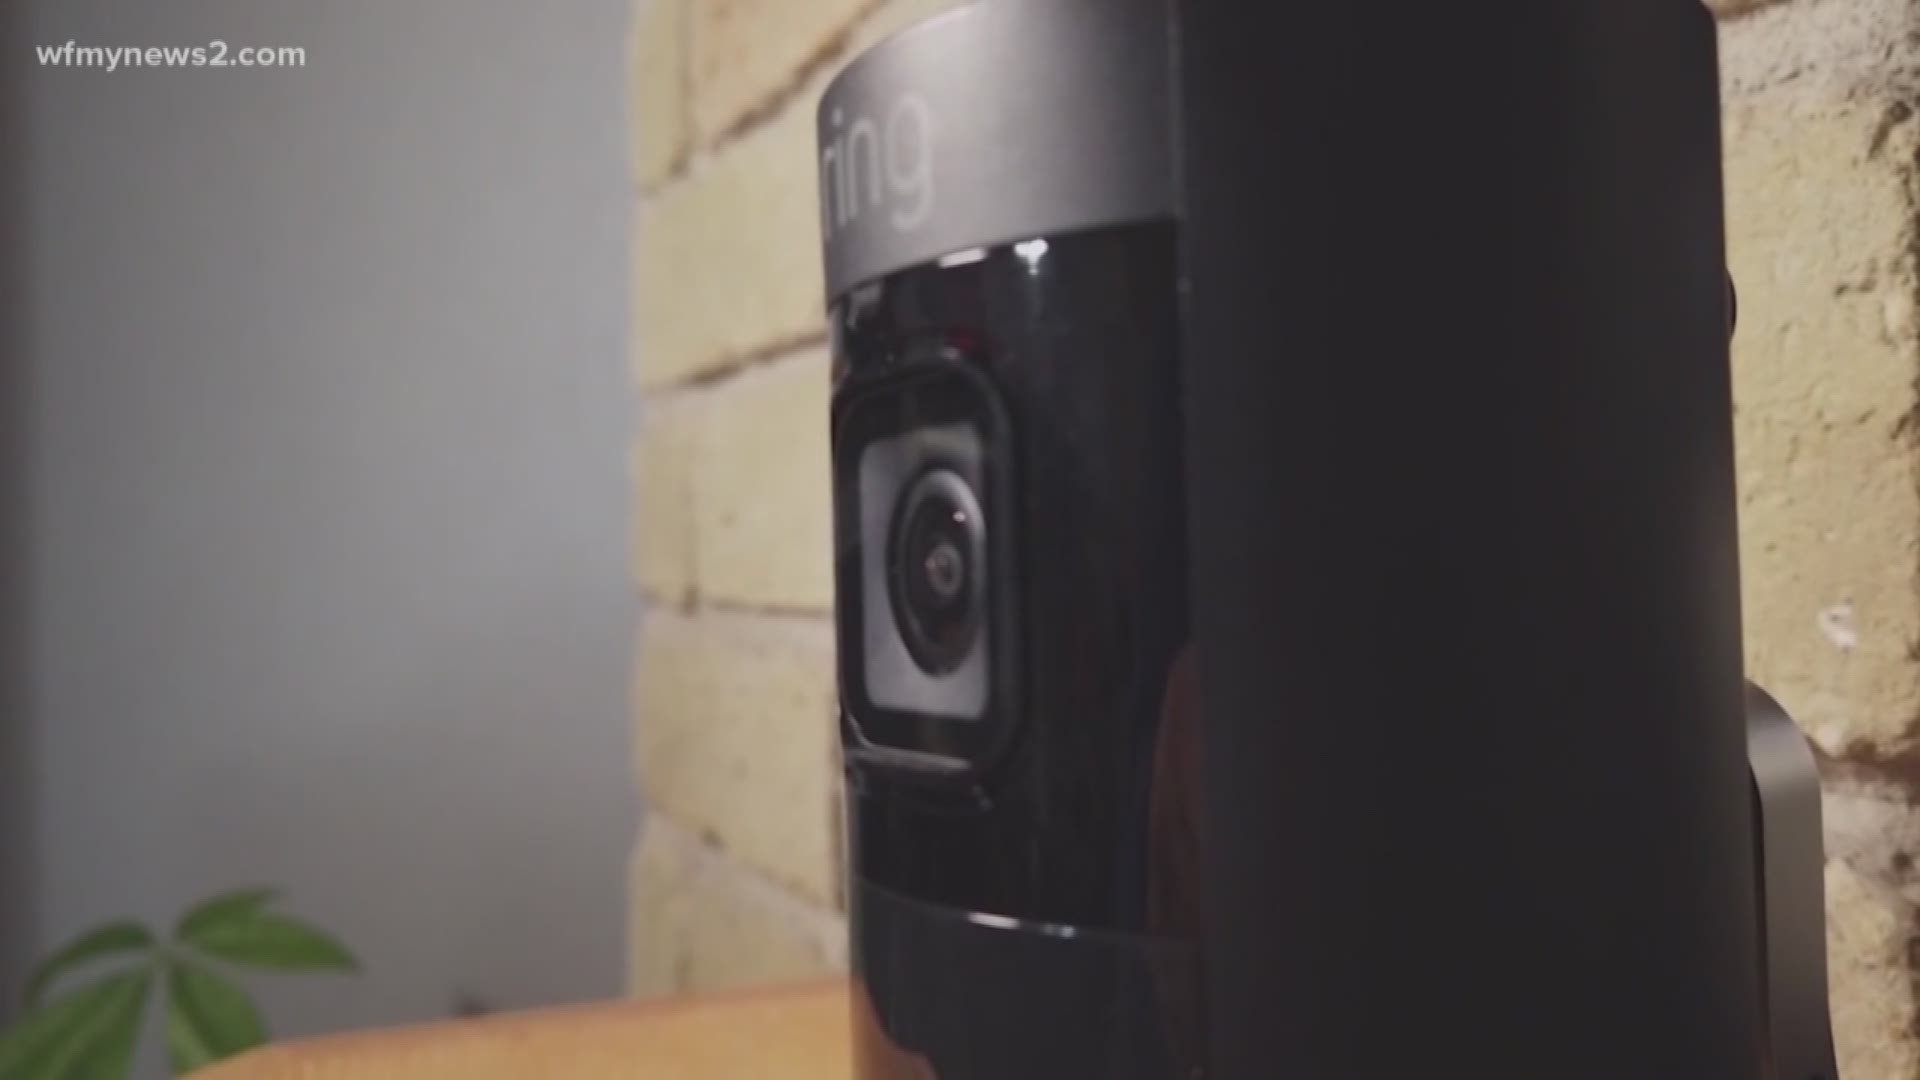 Hackers have found a way to access your ring camera system and spy on you.